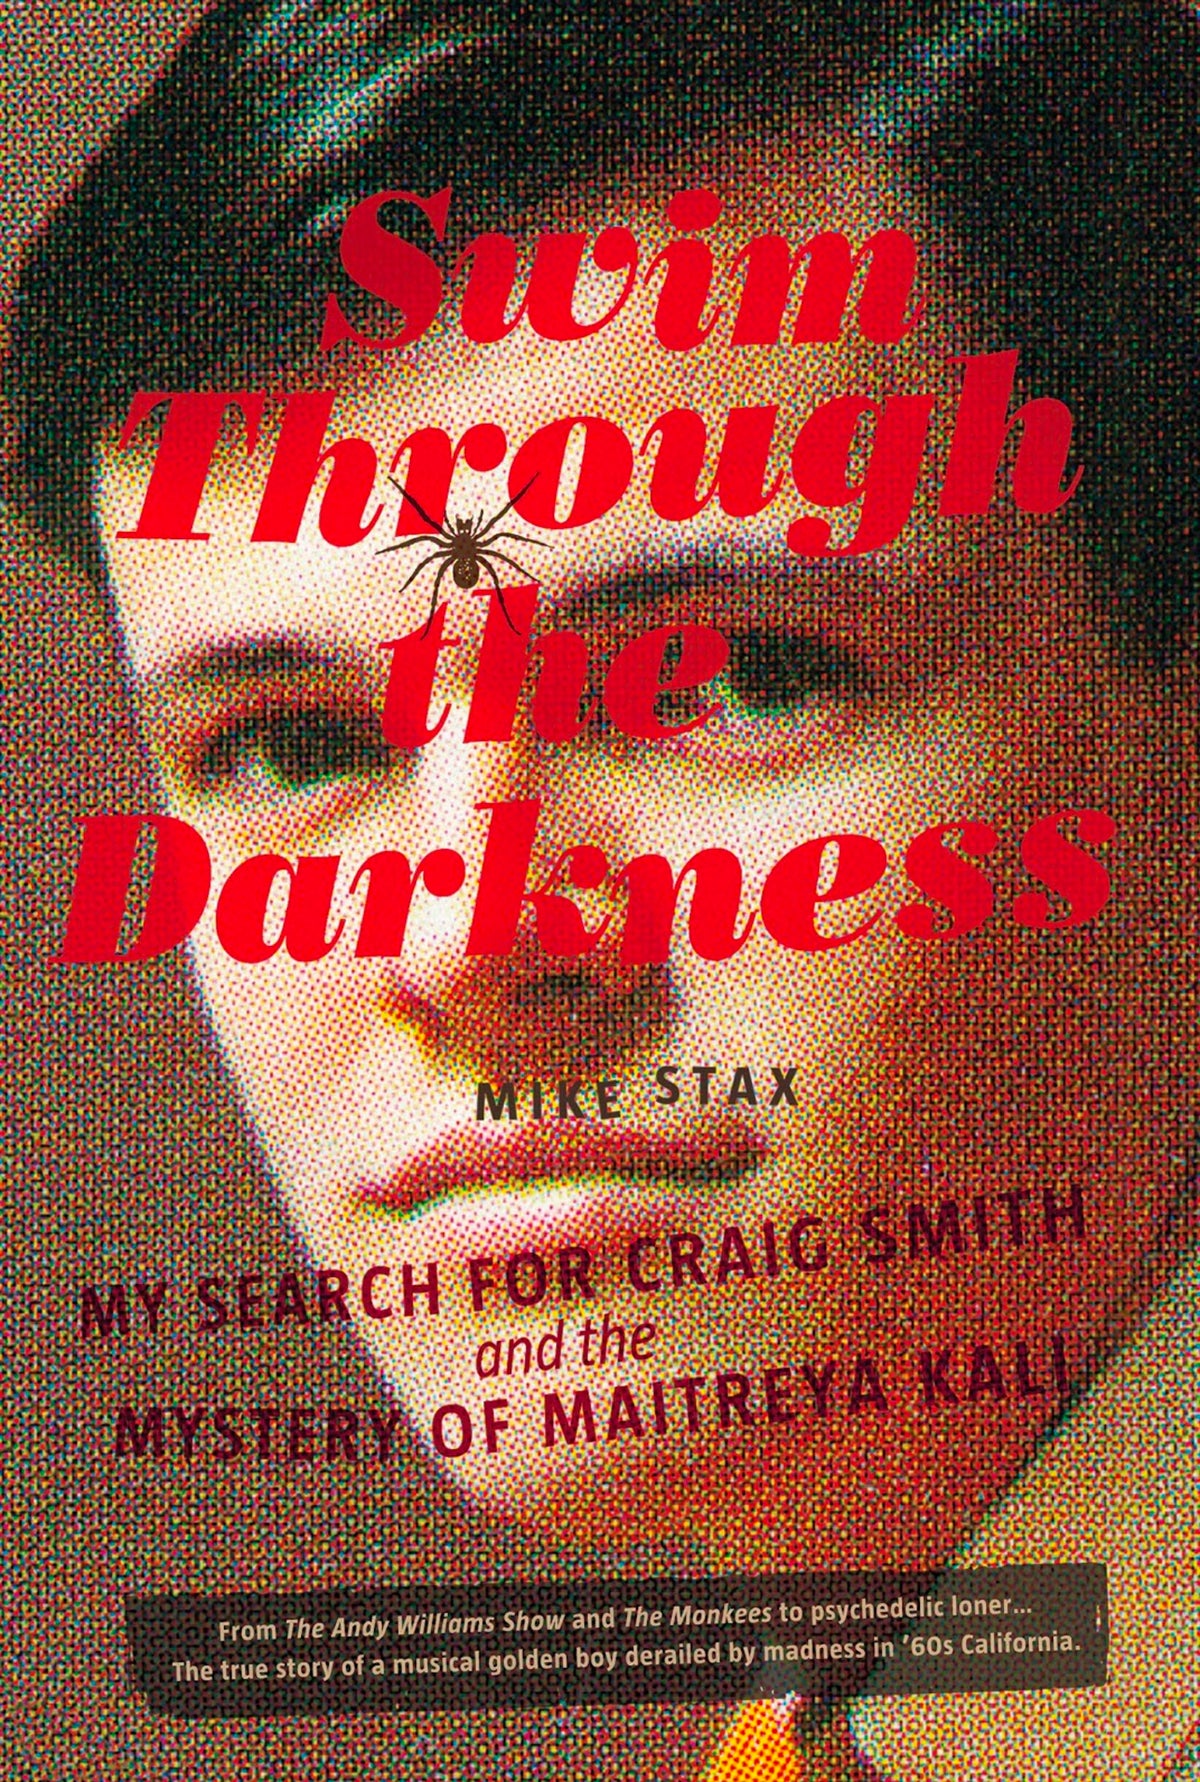 Swim Through The Darkness book by Mike Stax